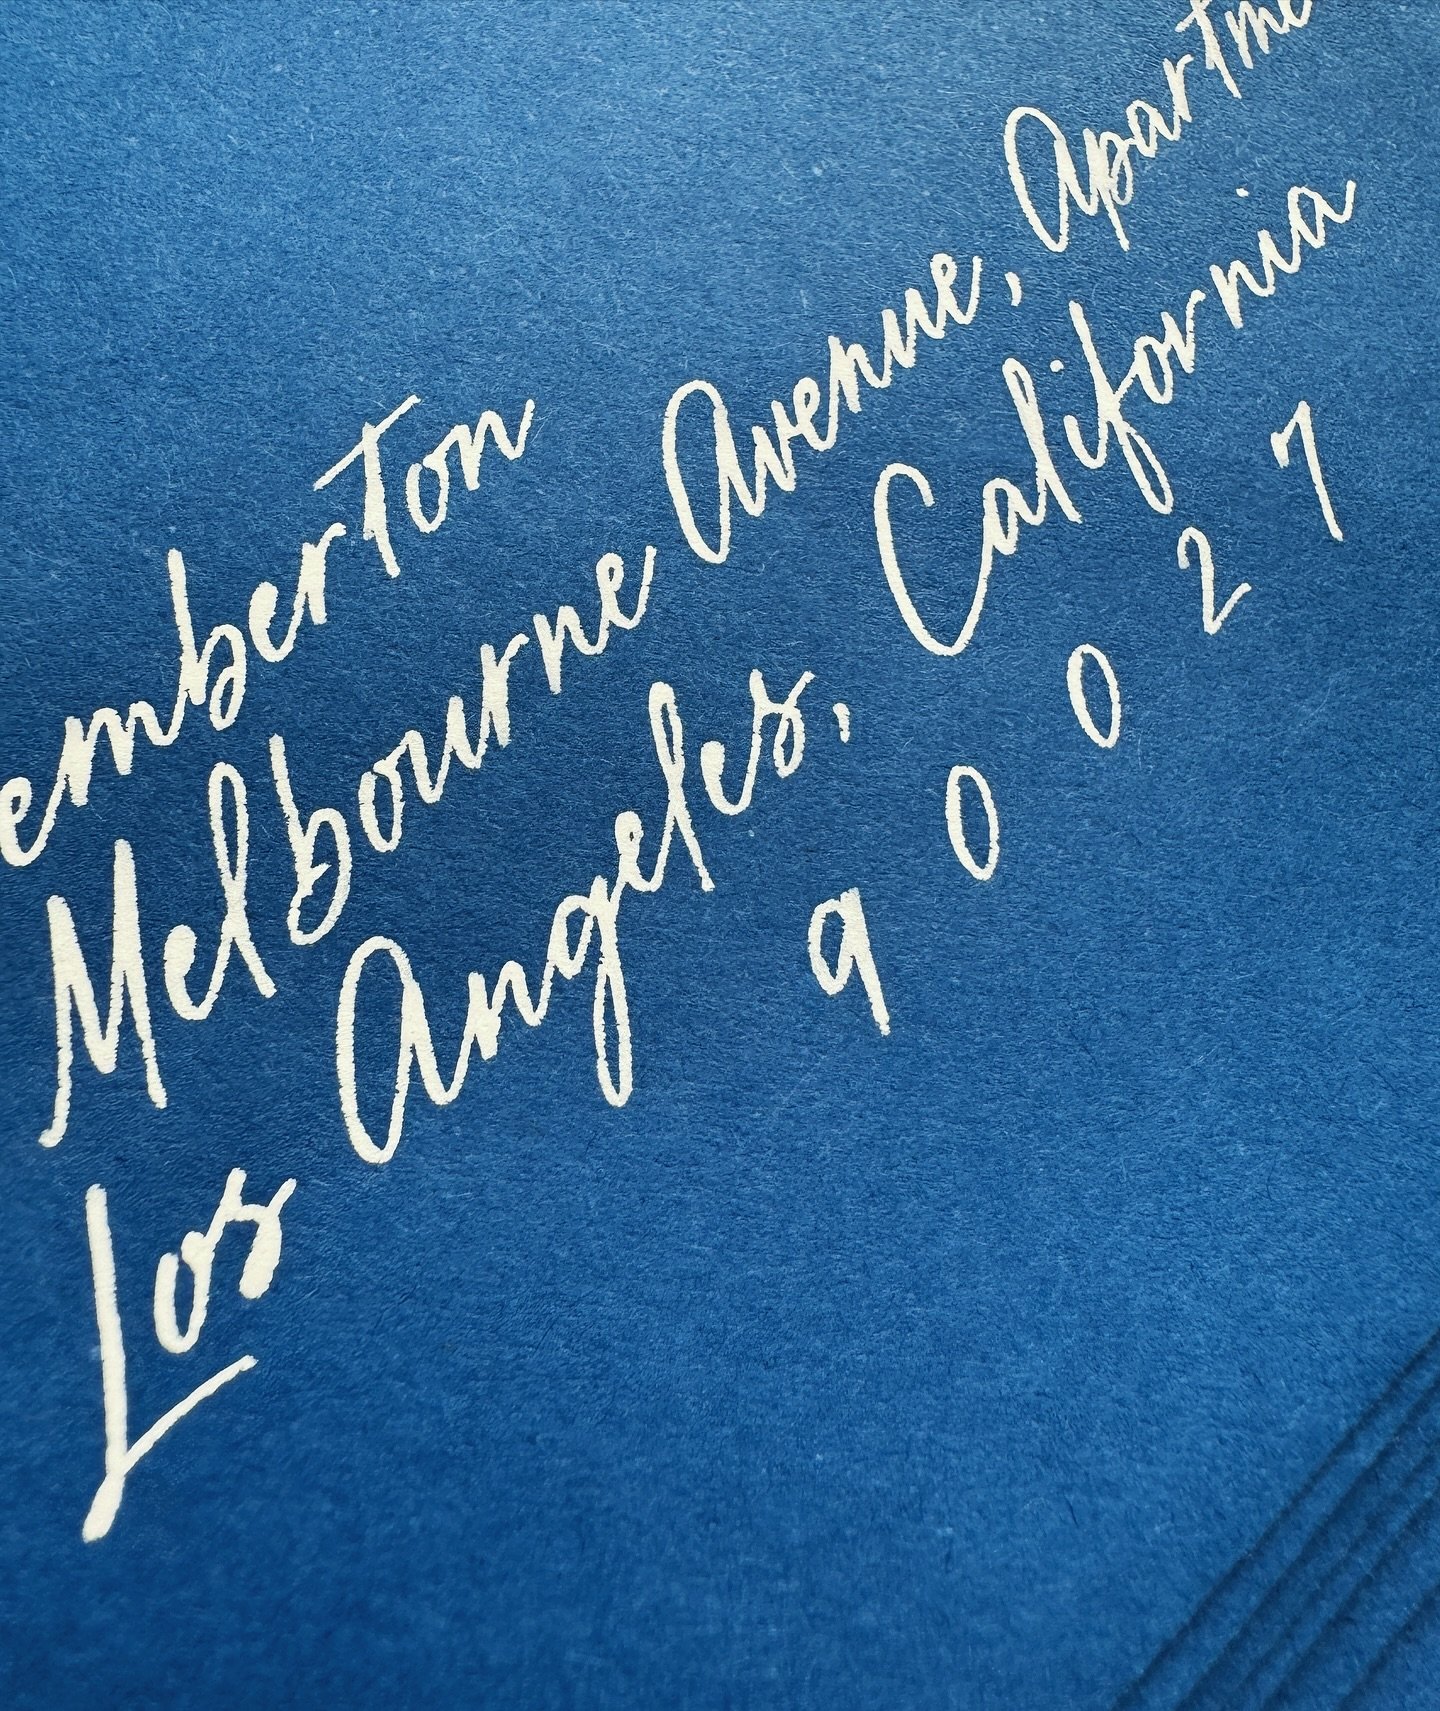 Is it me, or is this breezy modern script just meant to write &ldquo;Los Angeles, California&rdquo; (or any place SoCal)? 🌊

And, Paper Source Royal Blue + BPW is always a winning combo for a summer wedding invite! 

Ink: Bleed Proof White
Nib: Brau